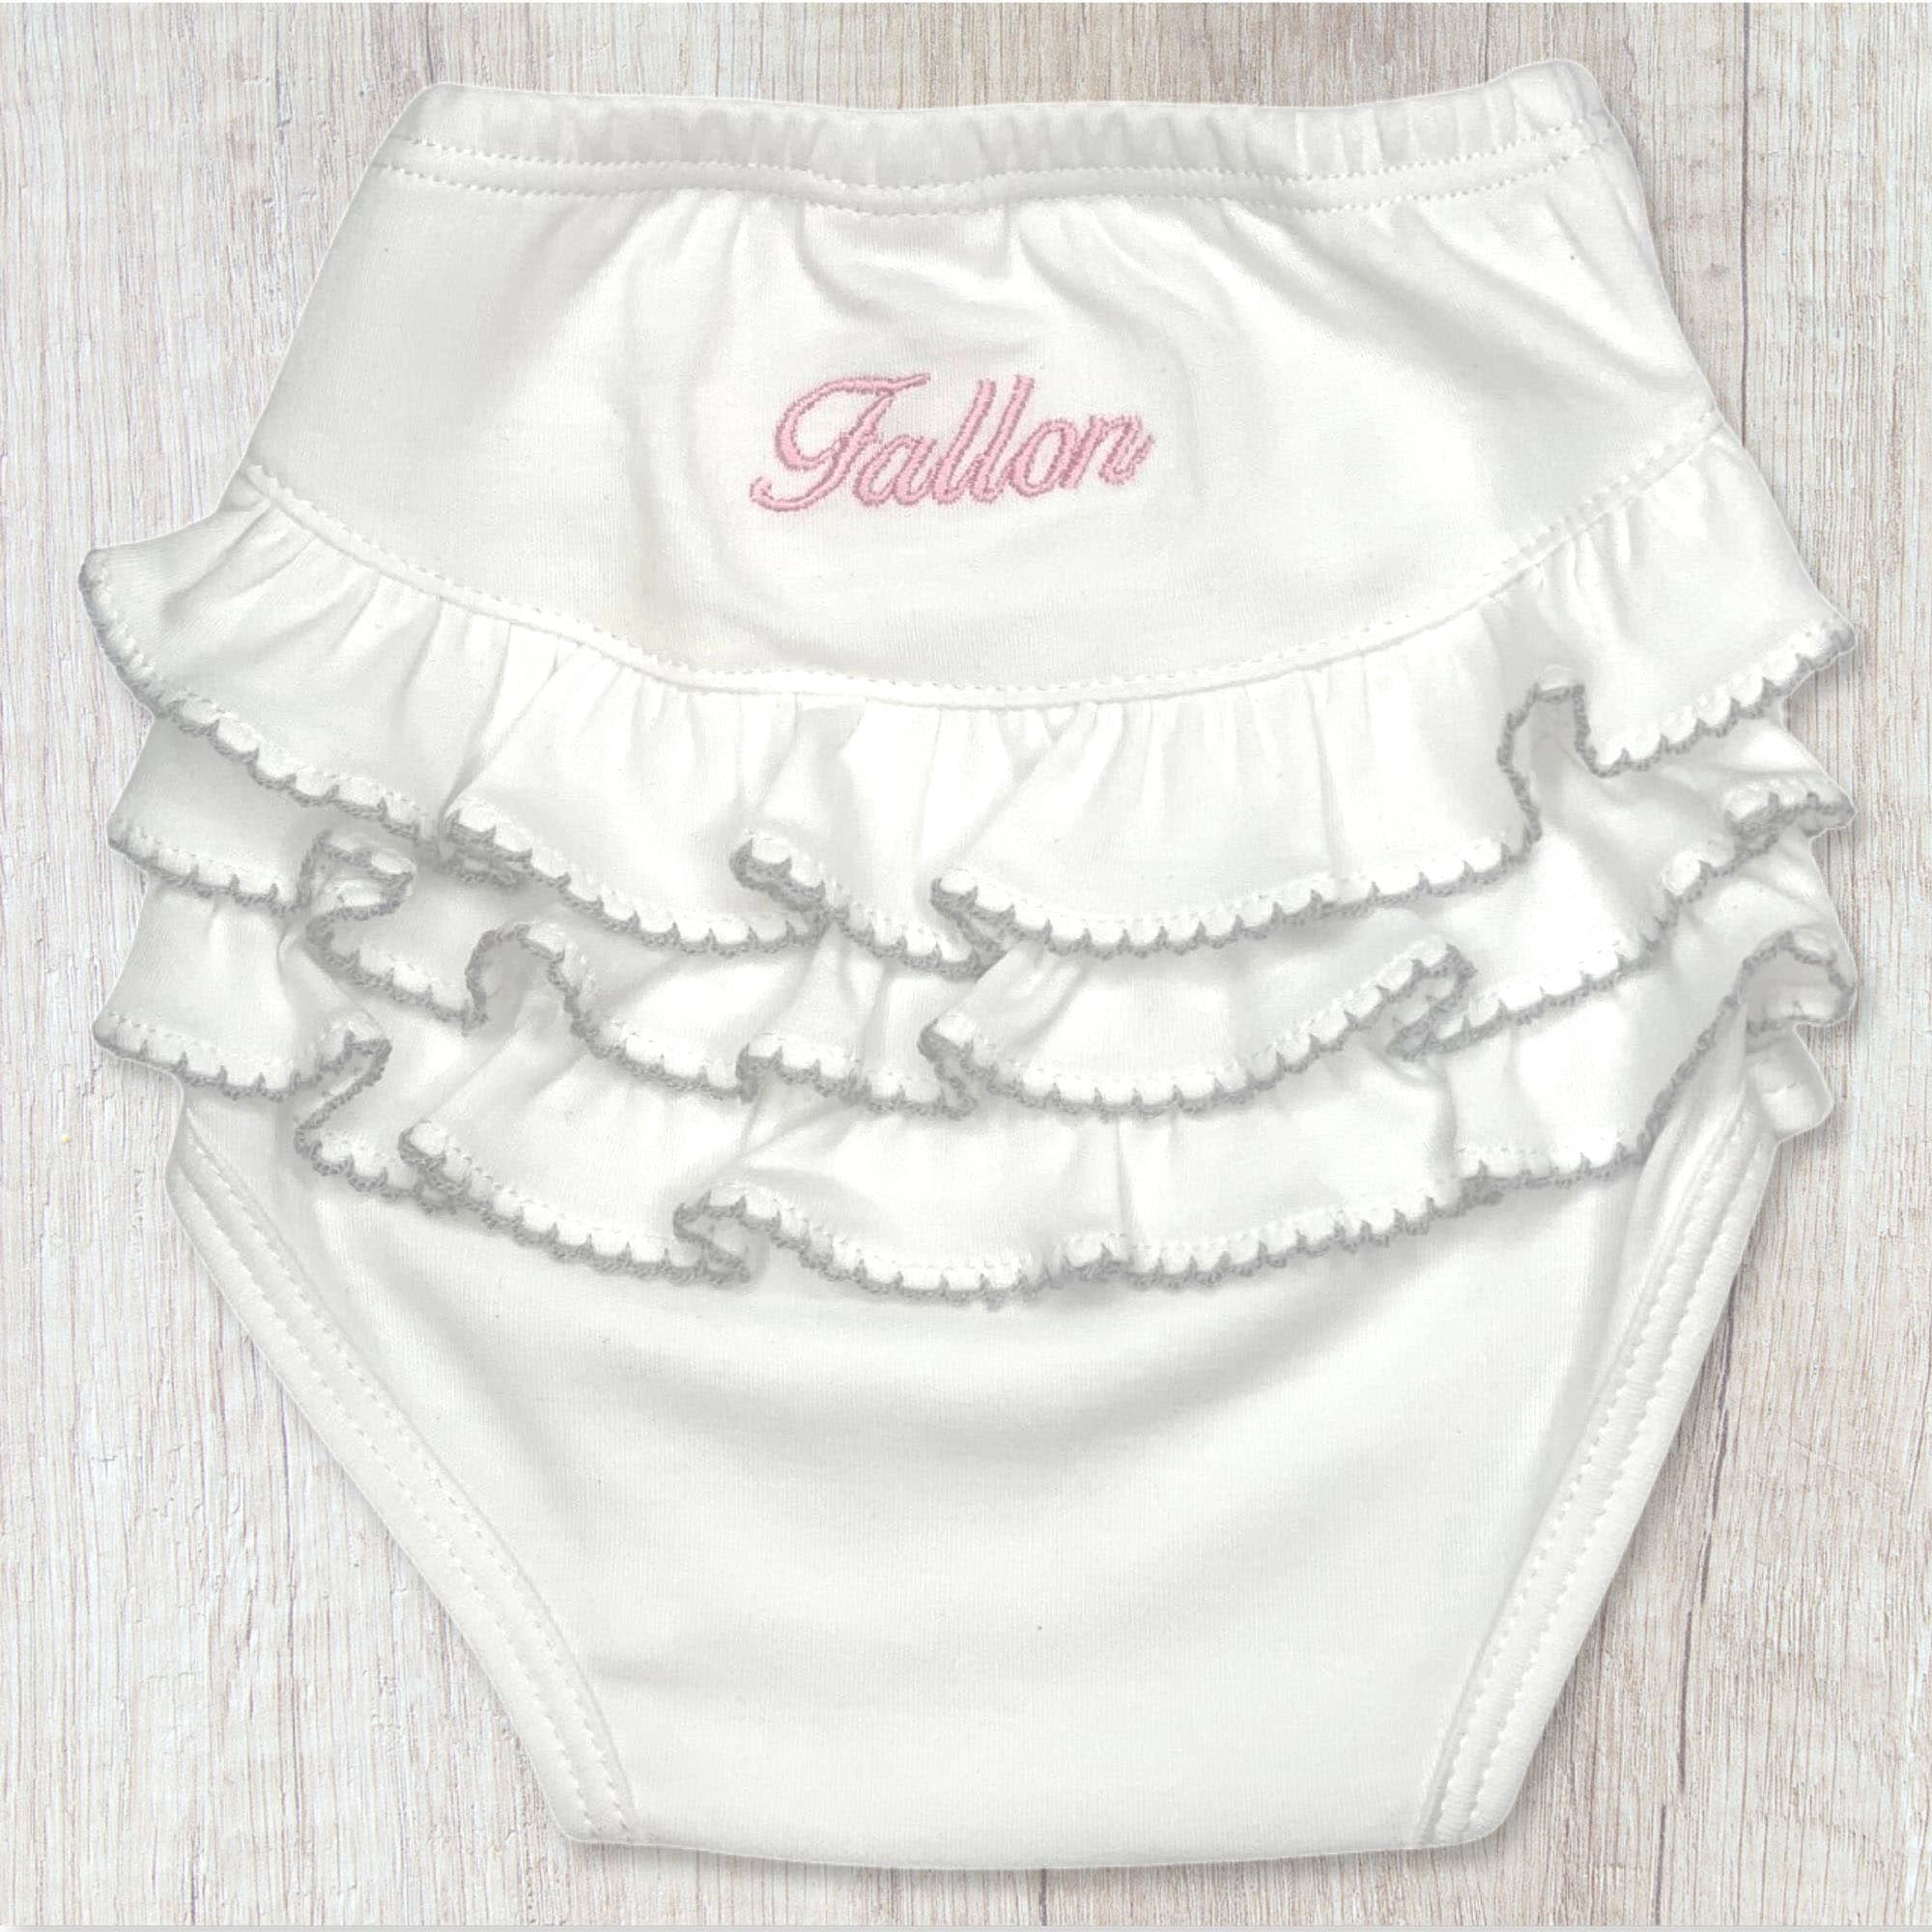 https://marcelagifts.com/wp-content/uploads/2018/11/Baby-Bloomers-Gray-Trim-Ballantines-Font-Baby-Pink-Thread-BBL-BPC.jpg